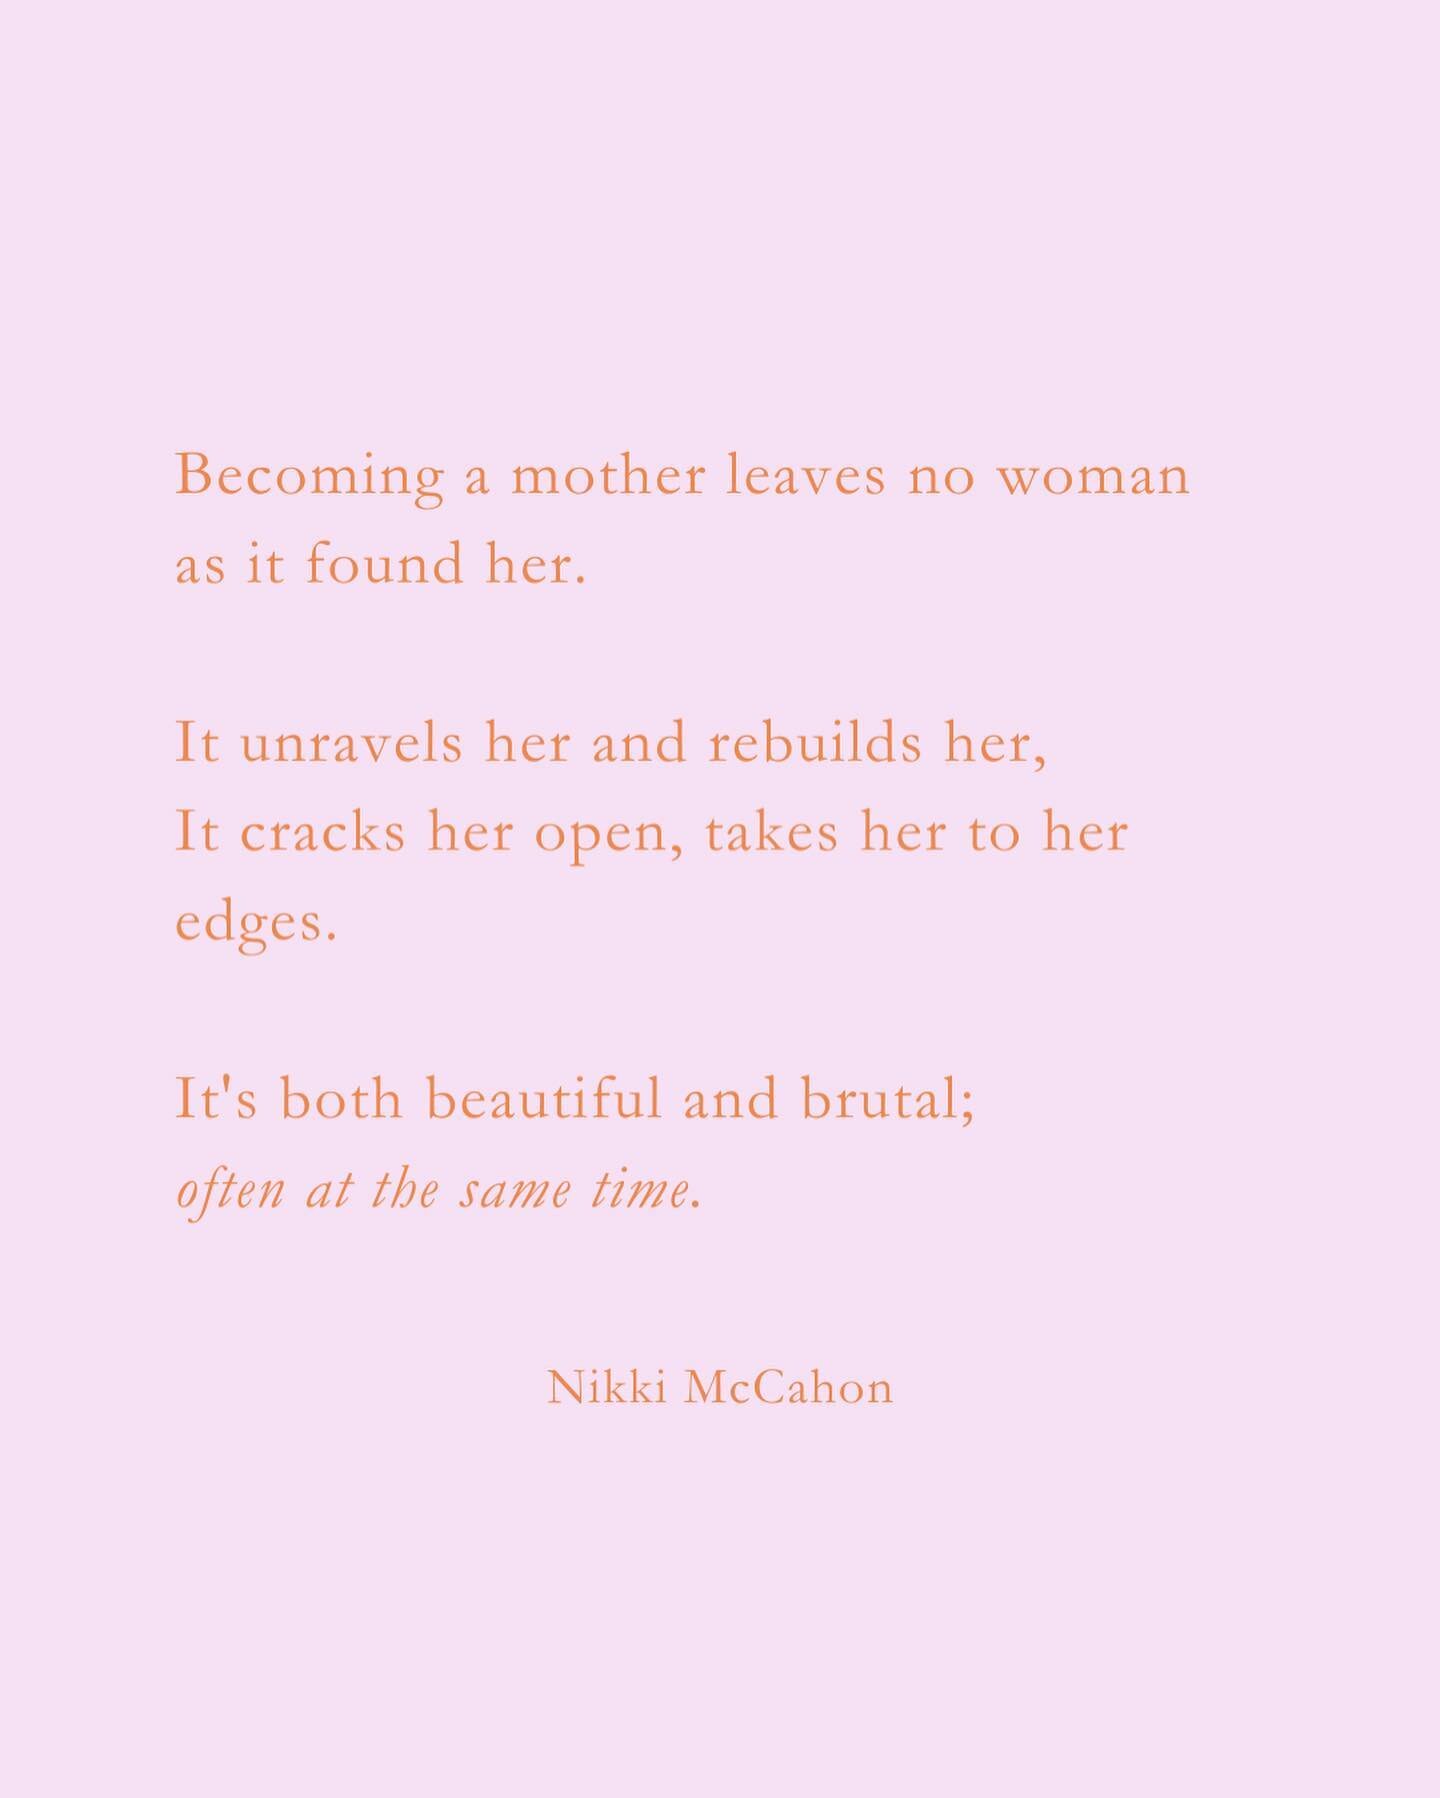 Becoming a mother leaves no woman as it found her. 
It unravels and rebuilds her. 
It cracks her open, takes her to her edges. 
It&rsquo;s both beautiful and brutal; often at the same time. 

~ 

Happy Mothers Day 🧡 Here&rsquo;s to honoring mothers 